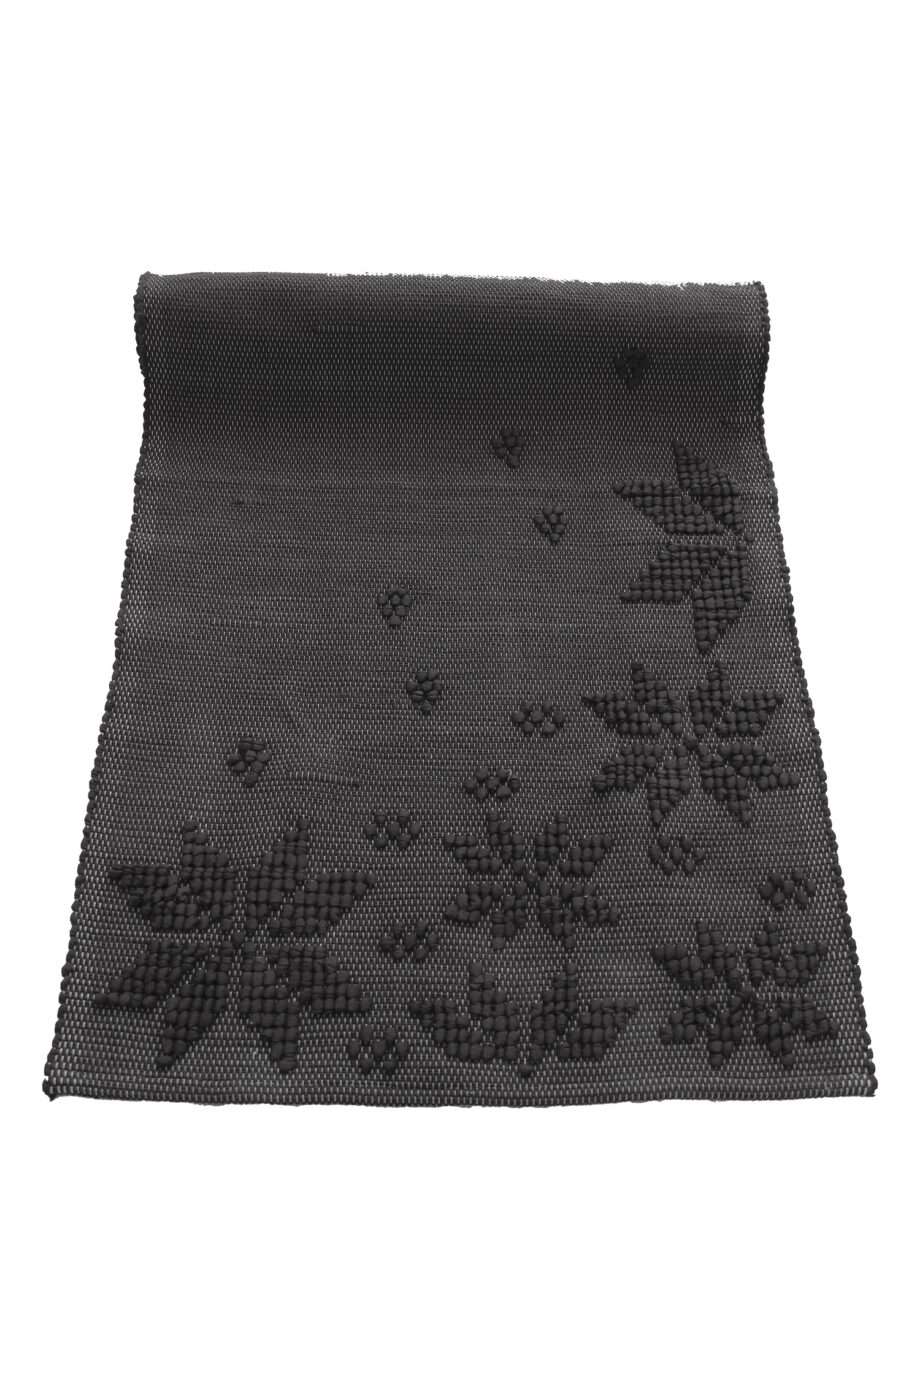 woven cotton floor mat snowflakes anthracite small